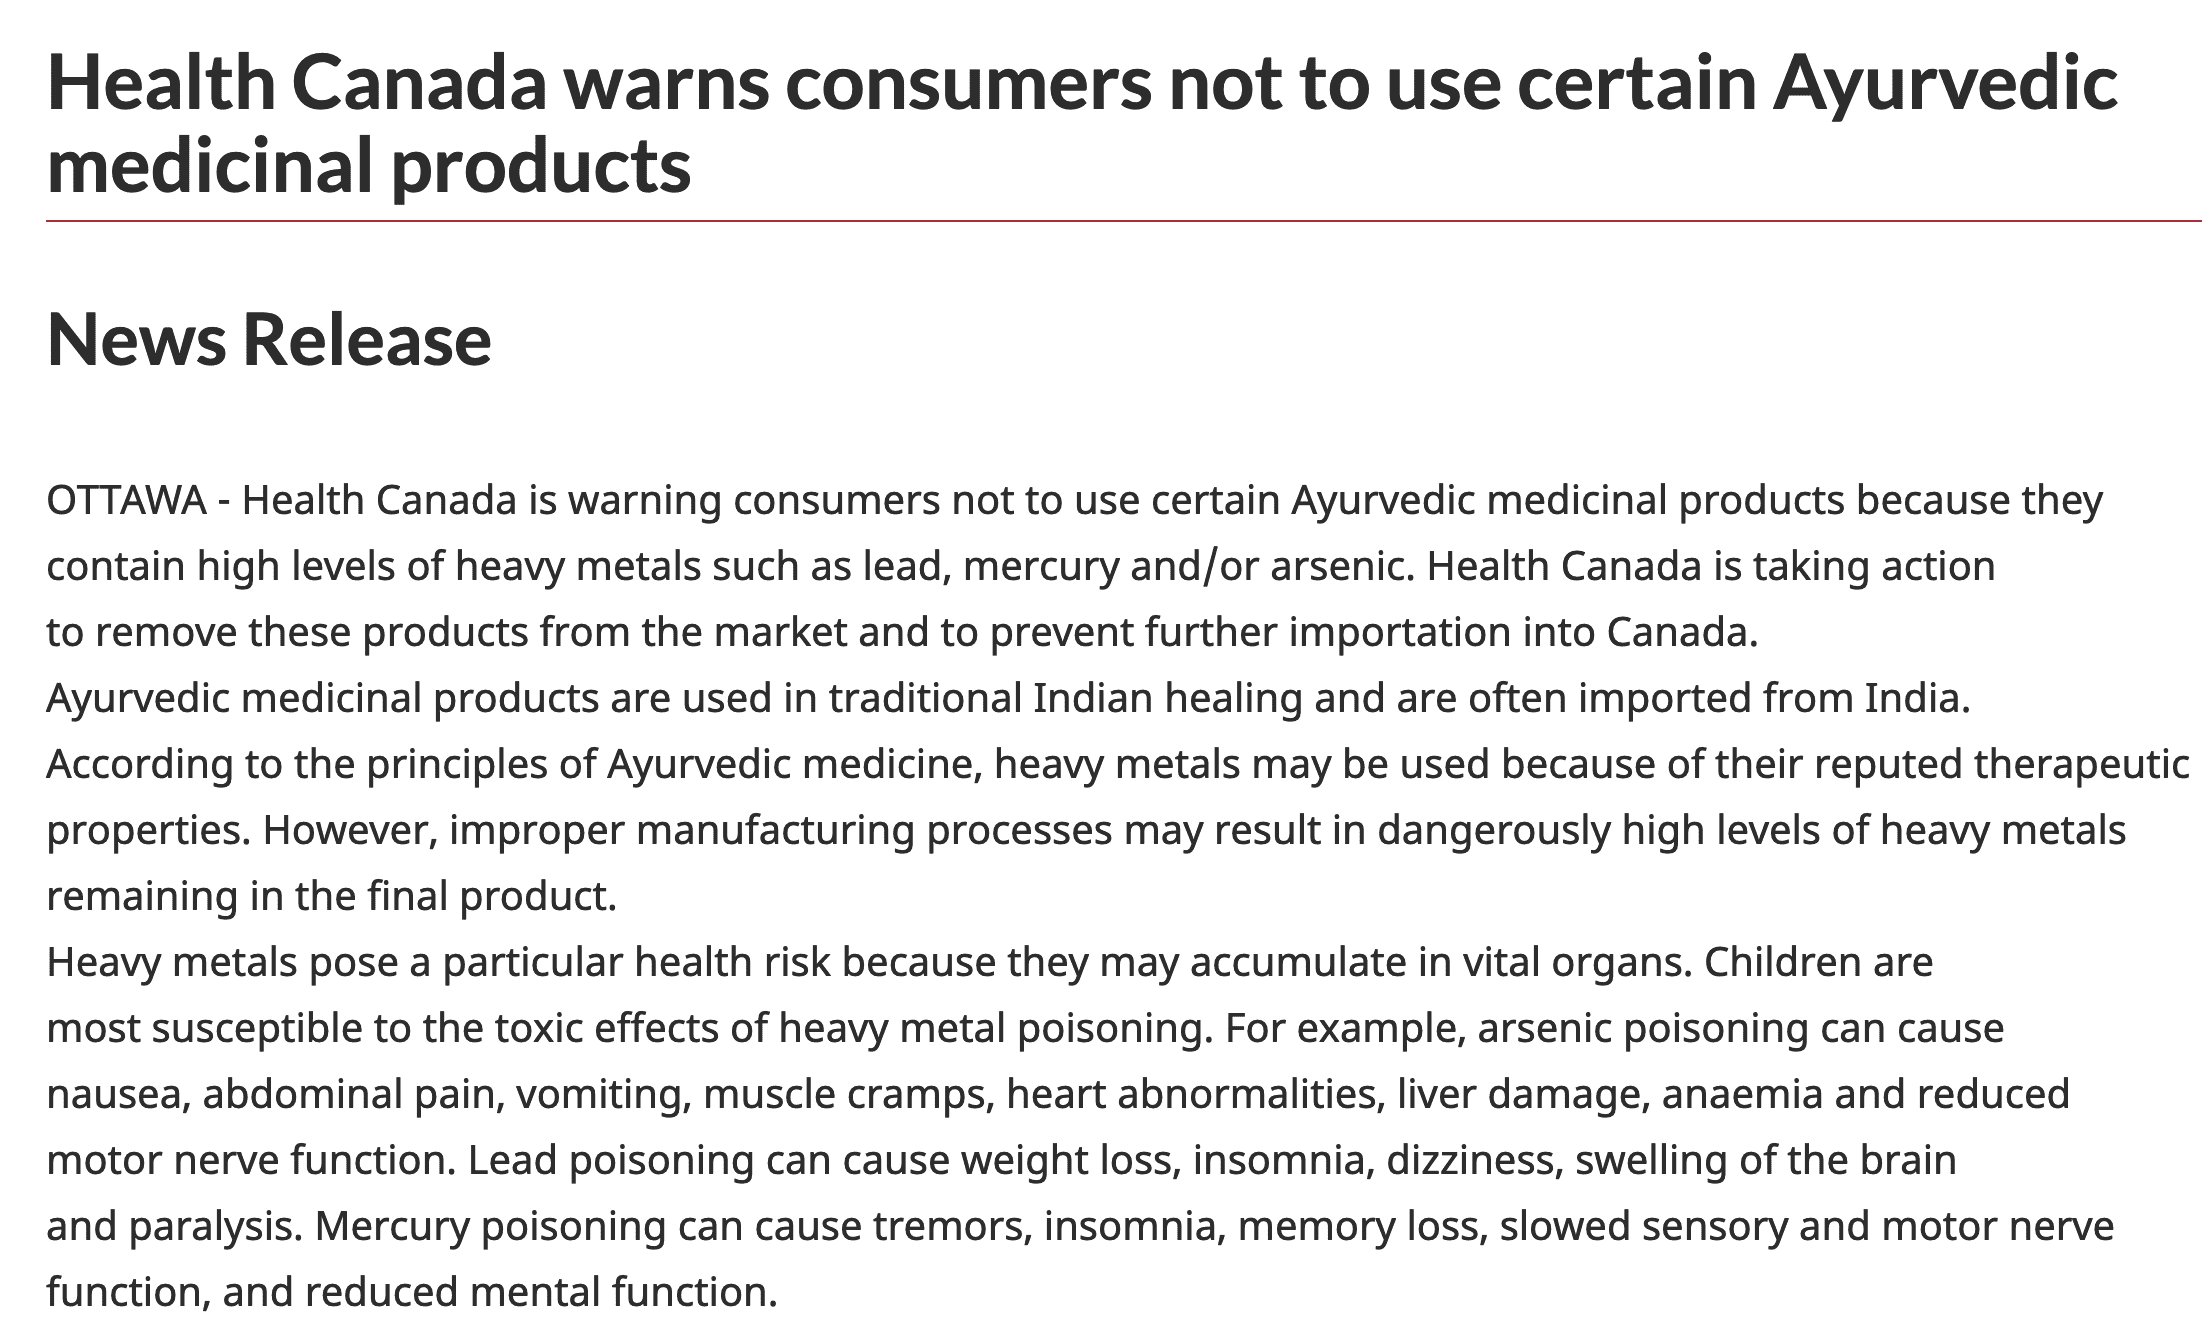 A small excerpt from "Health Canada Warns Consumers not to use certain Ayurvedic medicinal products"